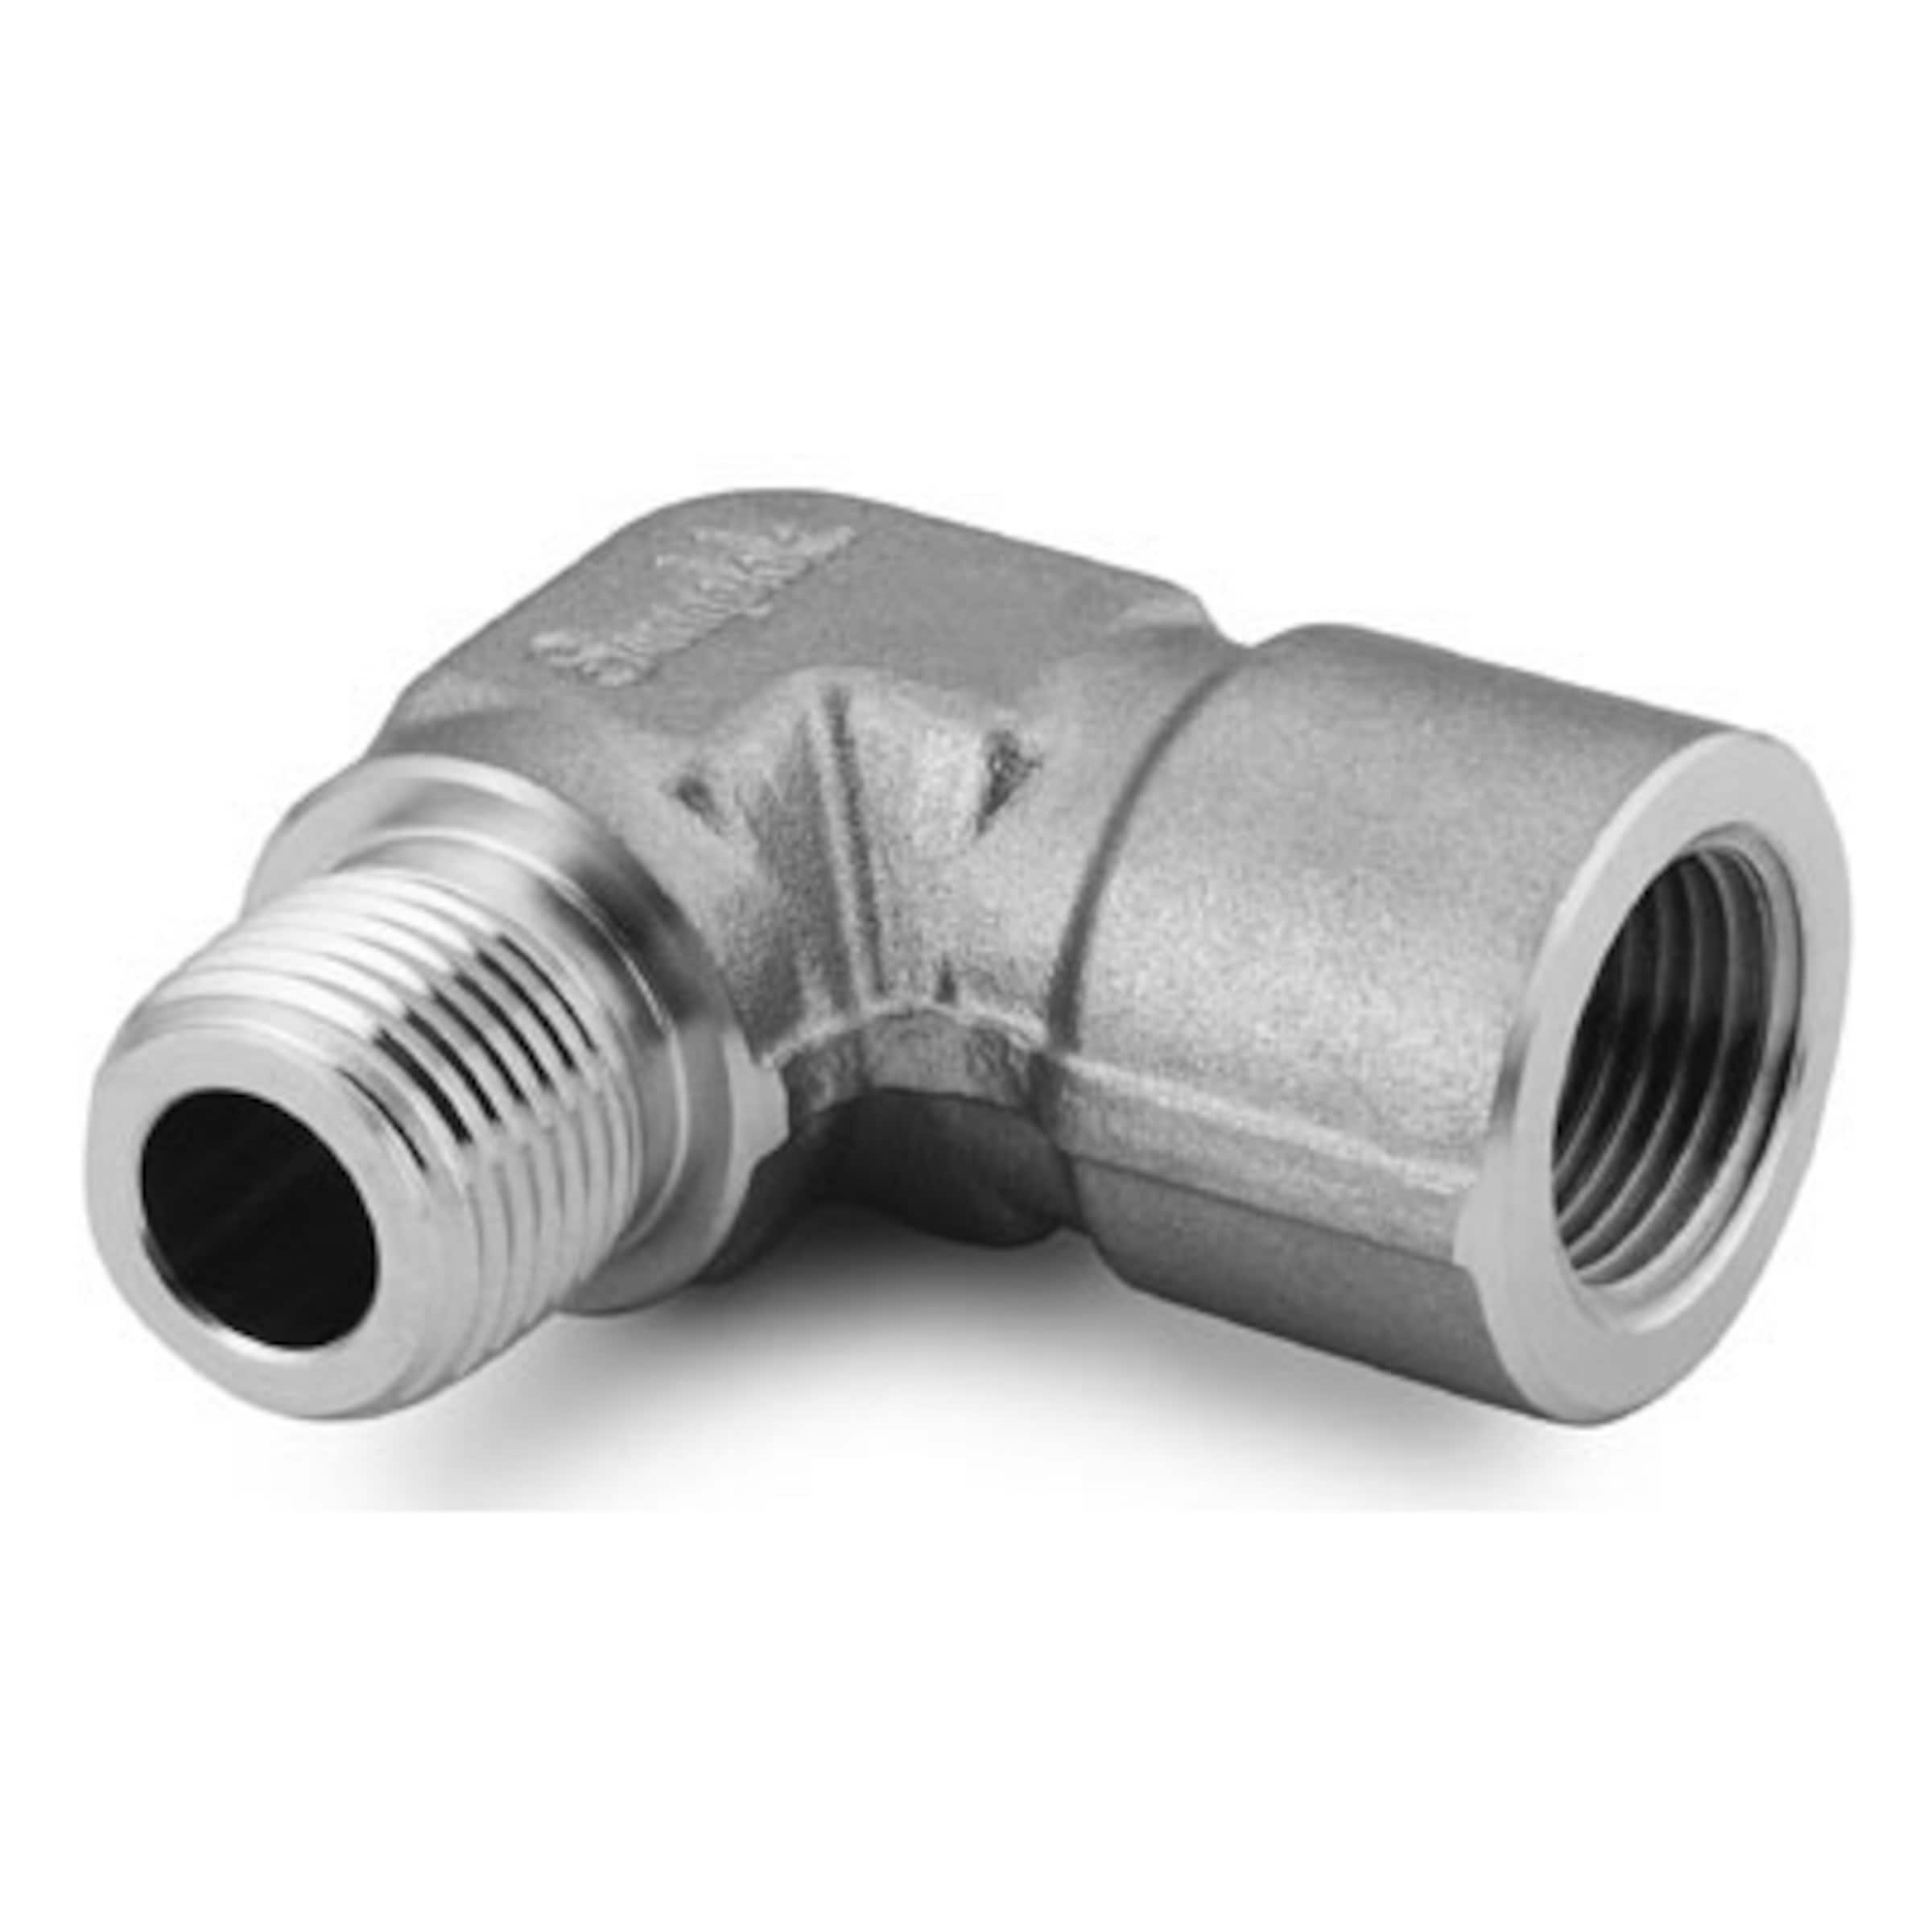 Stainless Steel Pipe Fittings - Union Elbow, 90 Degree